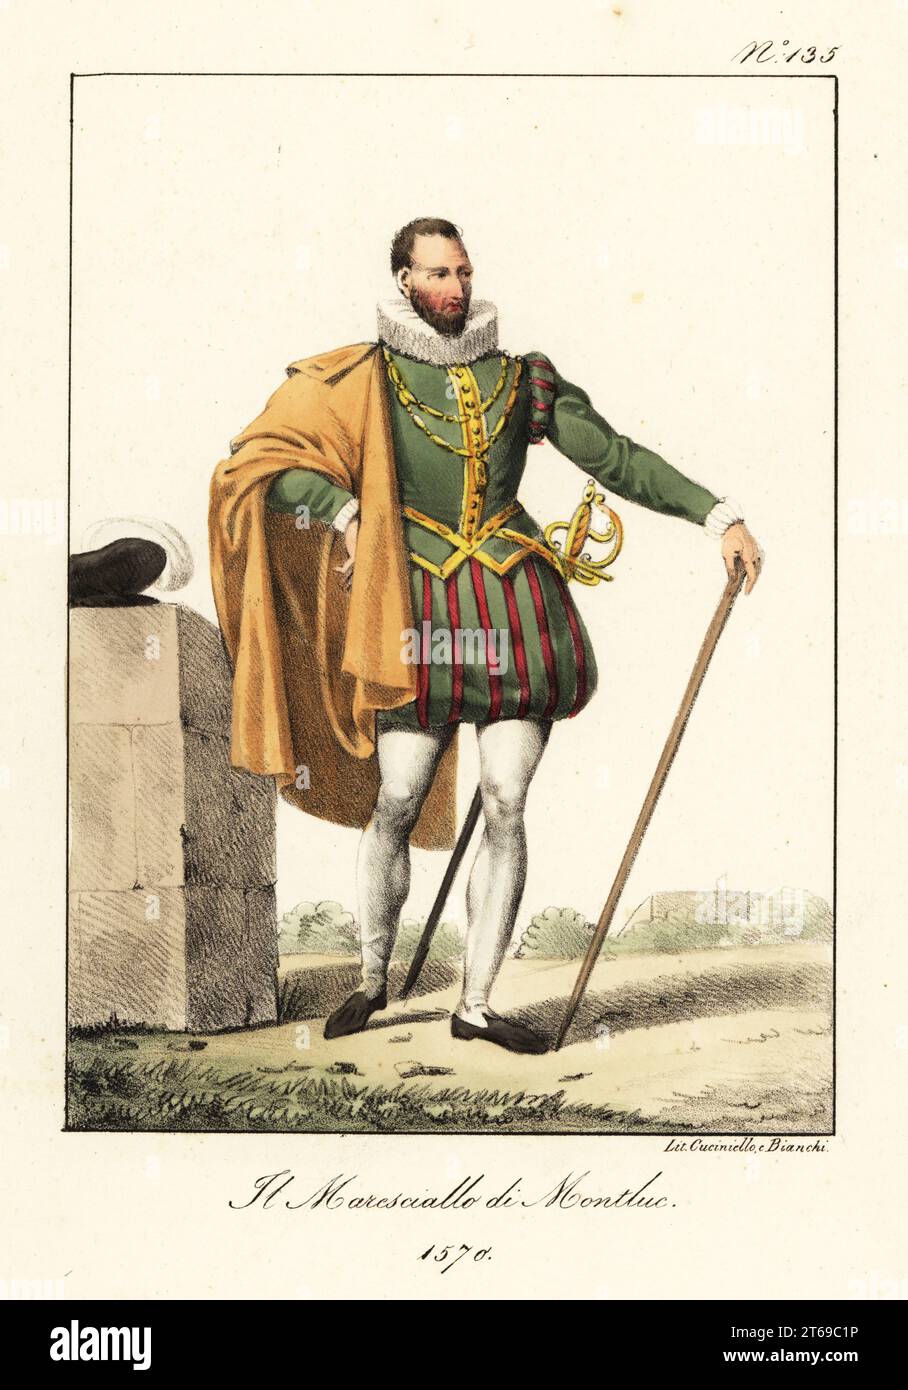 Blaise de Monluc, seigneur de Montluc, c.1502-1577. Professional soldier appointed Marshal of France in 1574. In large ruff, short cape, doublet and breeches, hose, armed with sword and cane. Le Marechal de Montluc, 1570. Handcoloured lithograph by Lorenzo Bianchi and Domenico Cuciniello after Hippolyte Lecomte from Costumi civili e militari della monarchia francese dal 1200 al 1820, Naples, 1825. Italian edition of Lecomtes Civilian and military costumes of the French monarchy from 1200 to 1820. Stock Photo